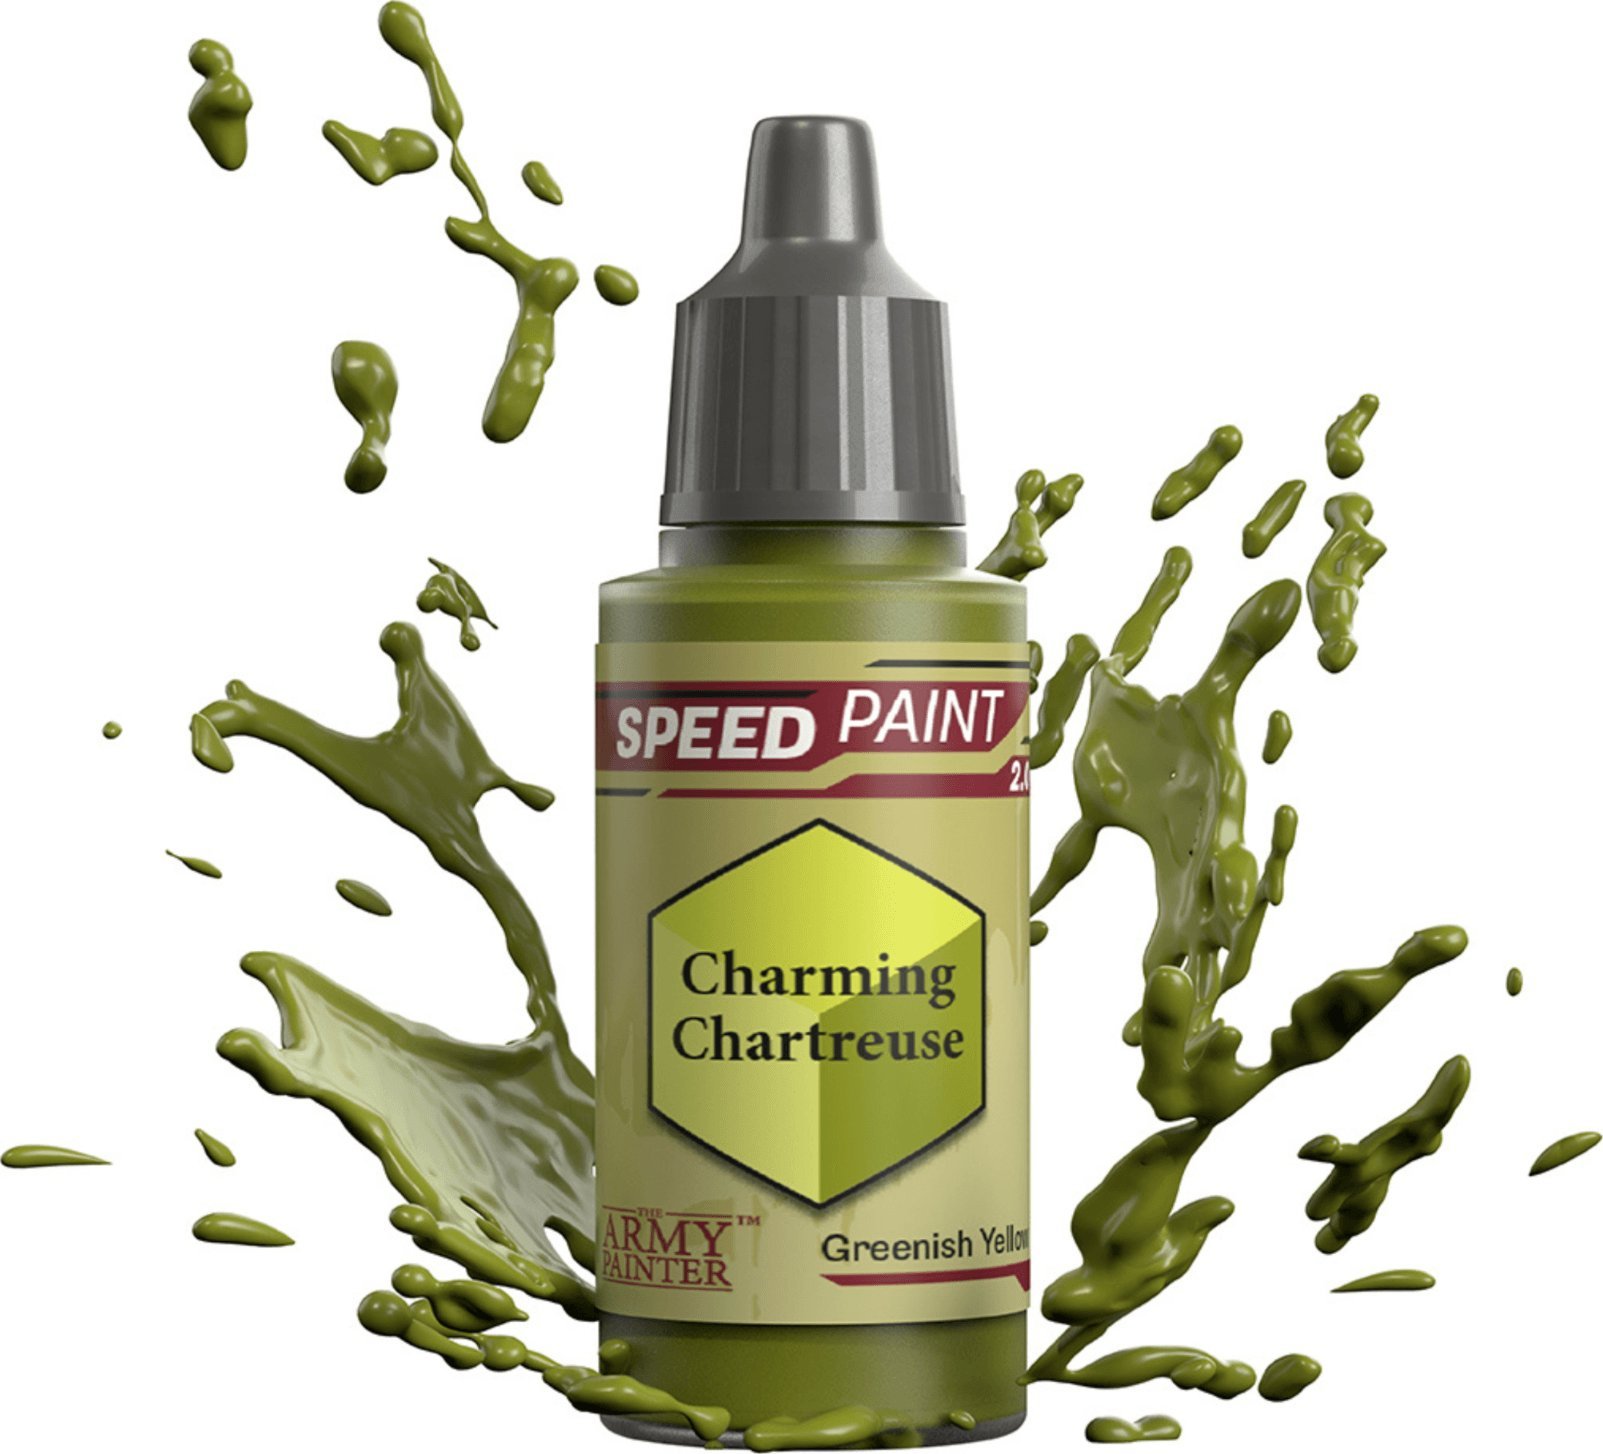 Army Painter FARBKA ARMY PAINTER SPEEDPAINT 2.0: CHARMING CHARTREUSE 2016336 (5713799204805)